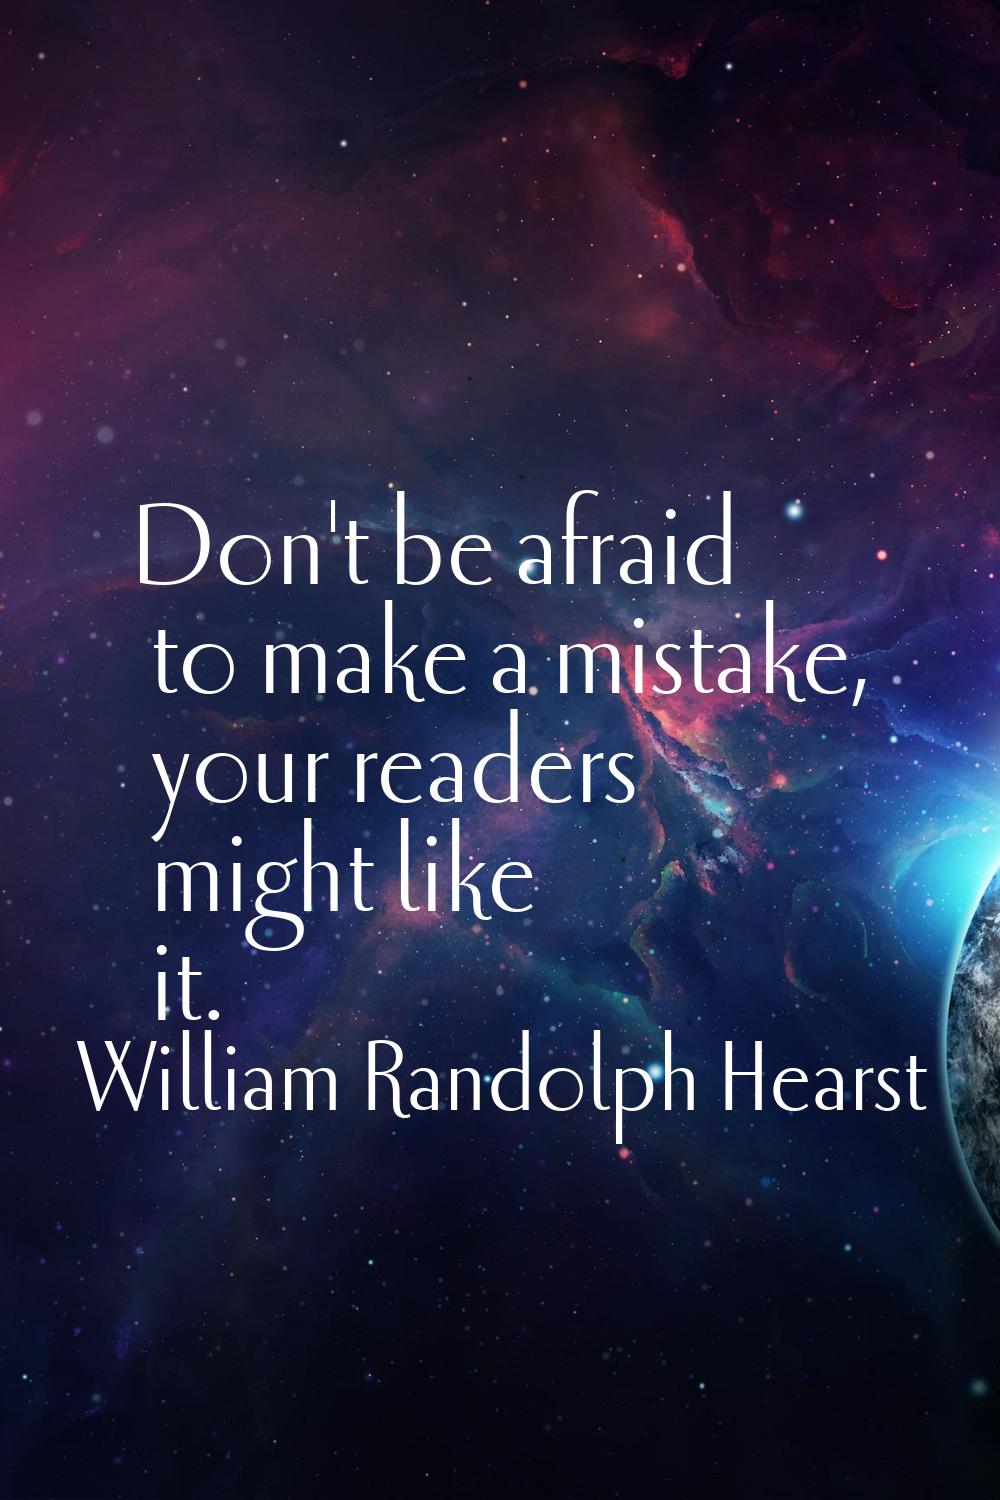 Don't be afraid to make a mistake, your readers might like it.